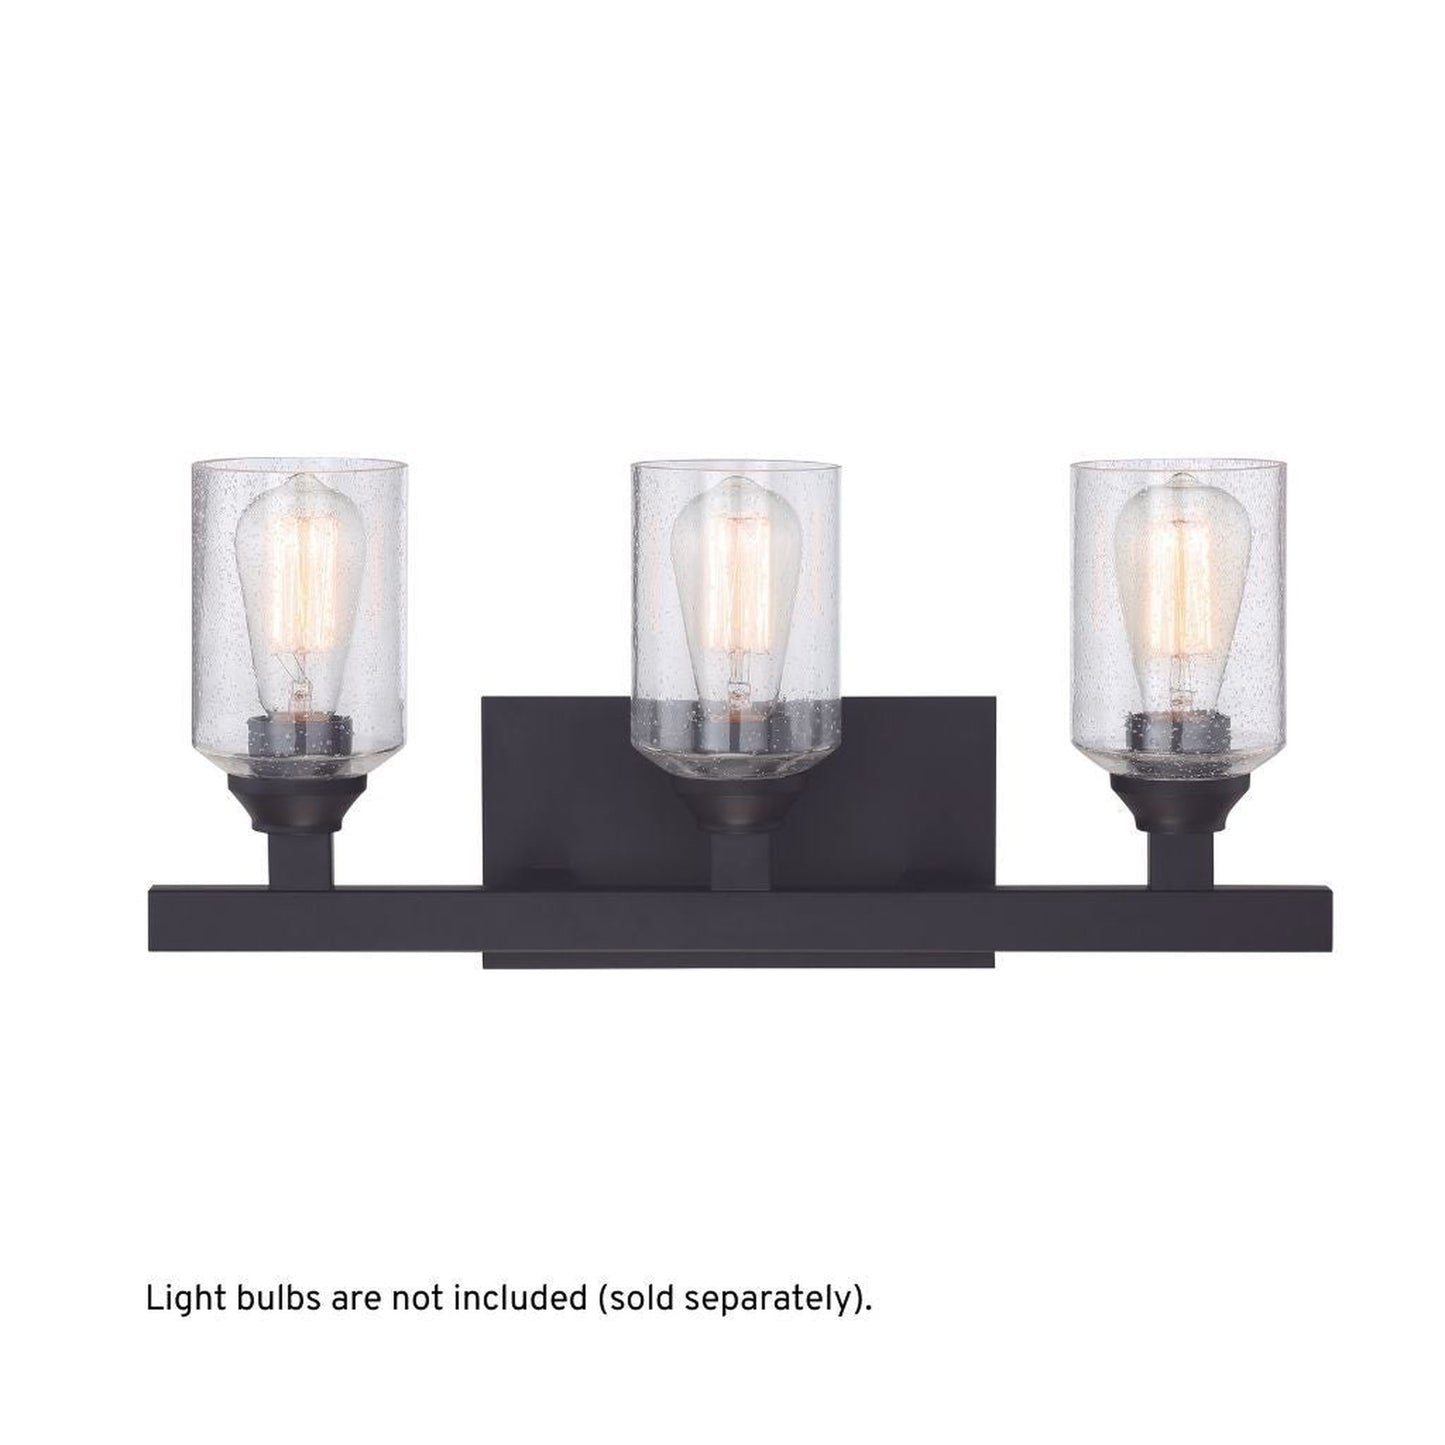 Craftmade Chicago 22" 3-Light Flat Black Vanity Light With Clear Seeded Glass Shades